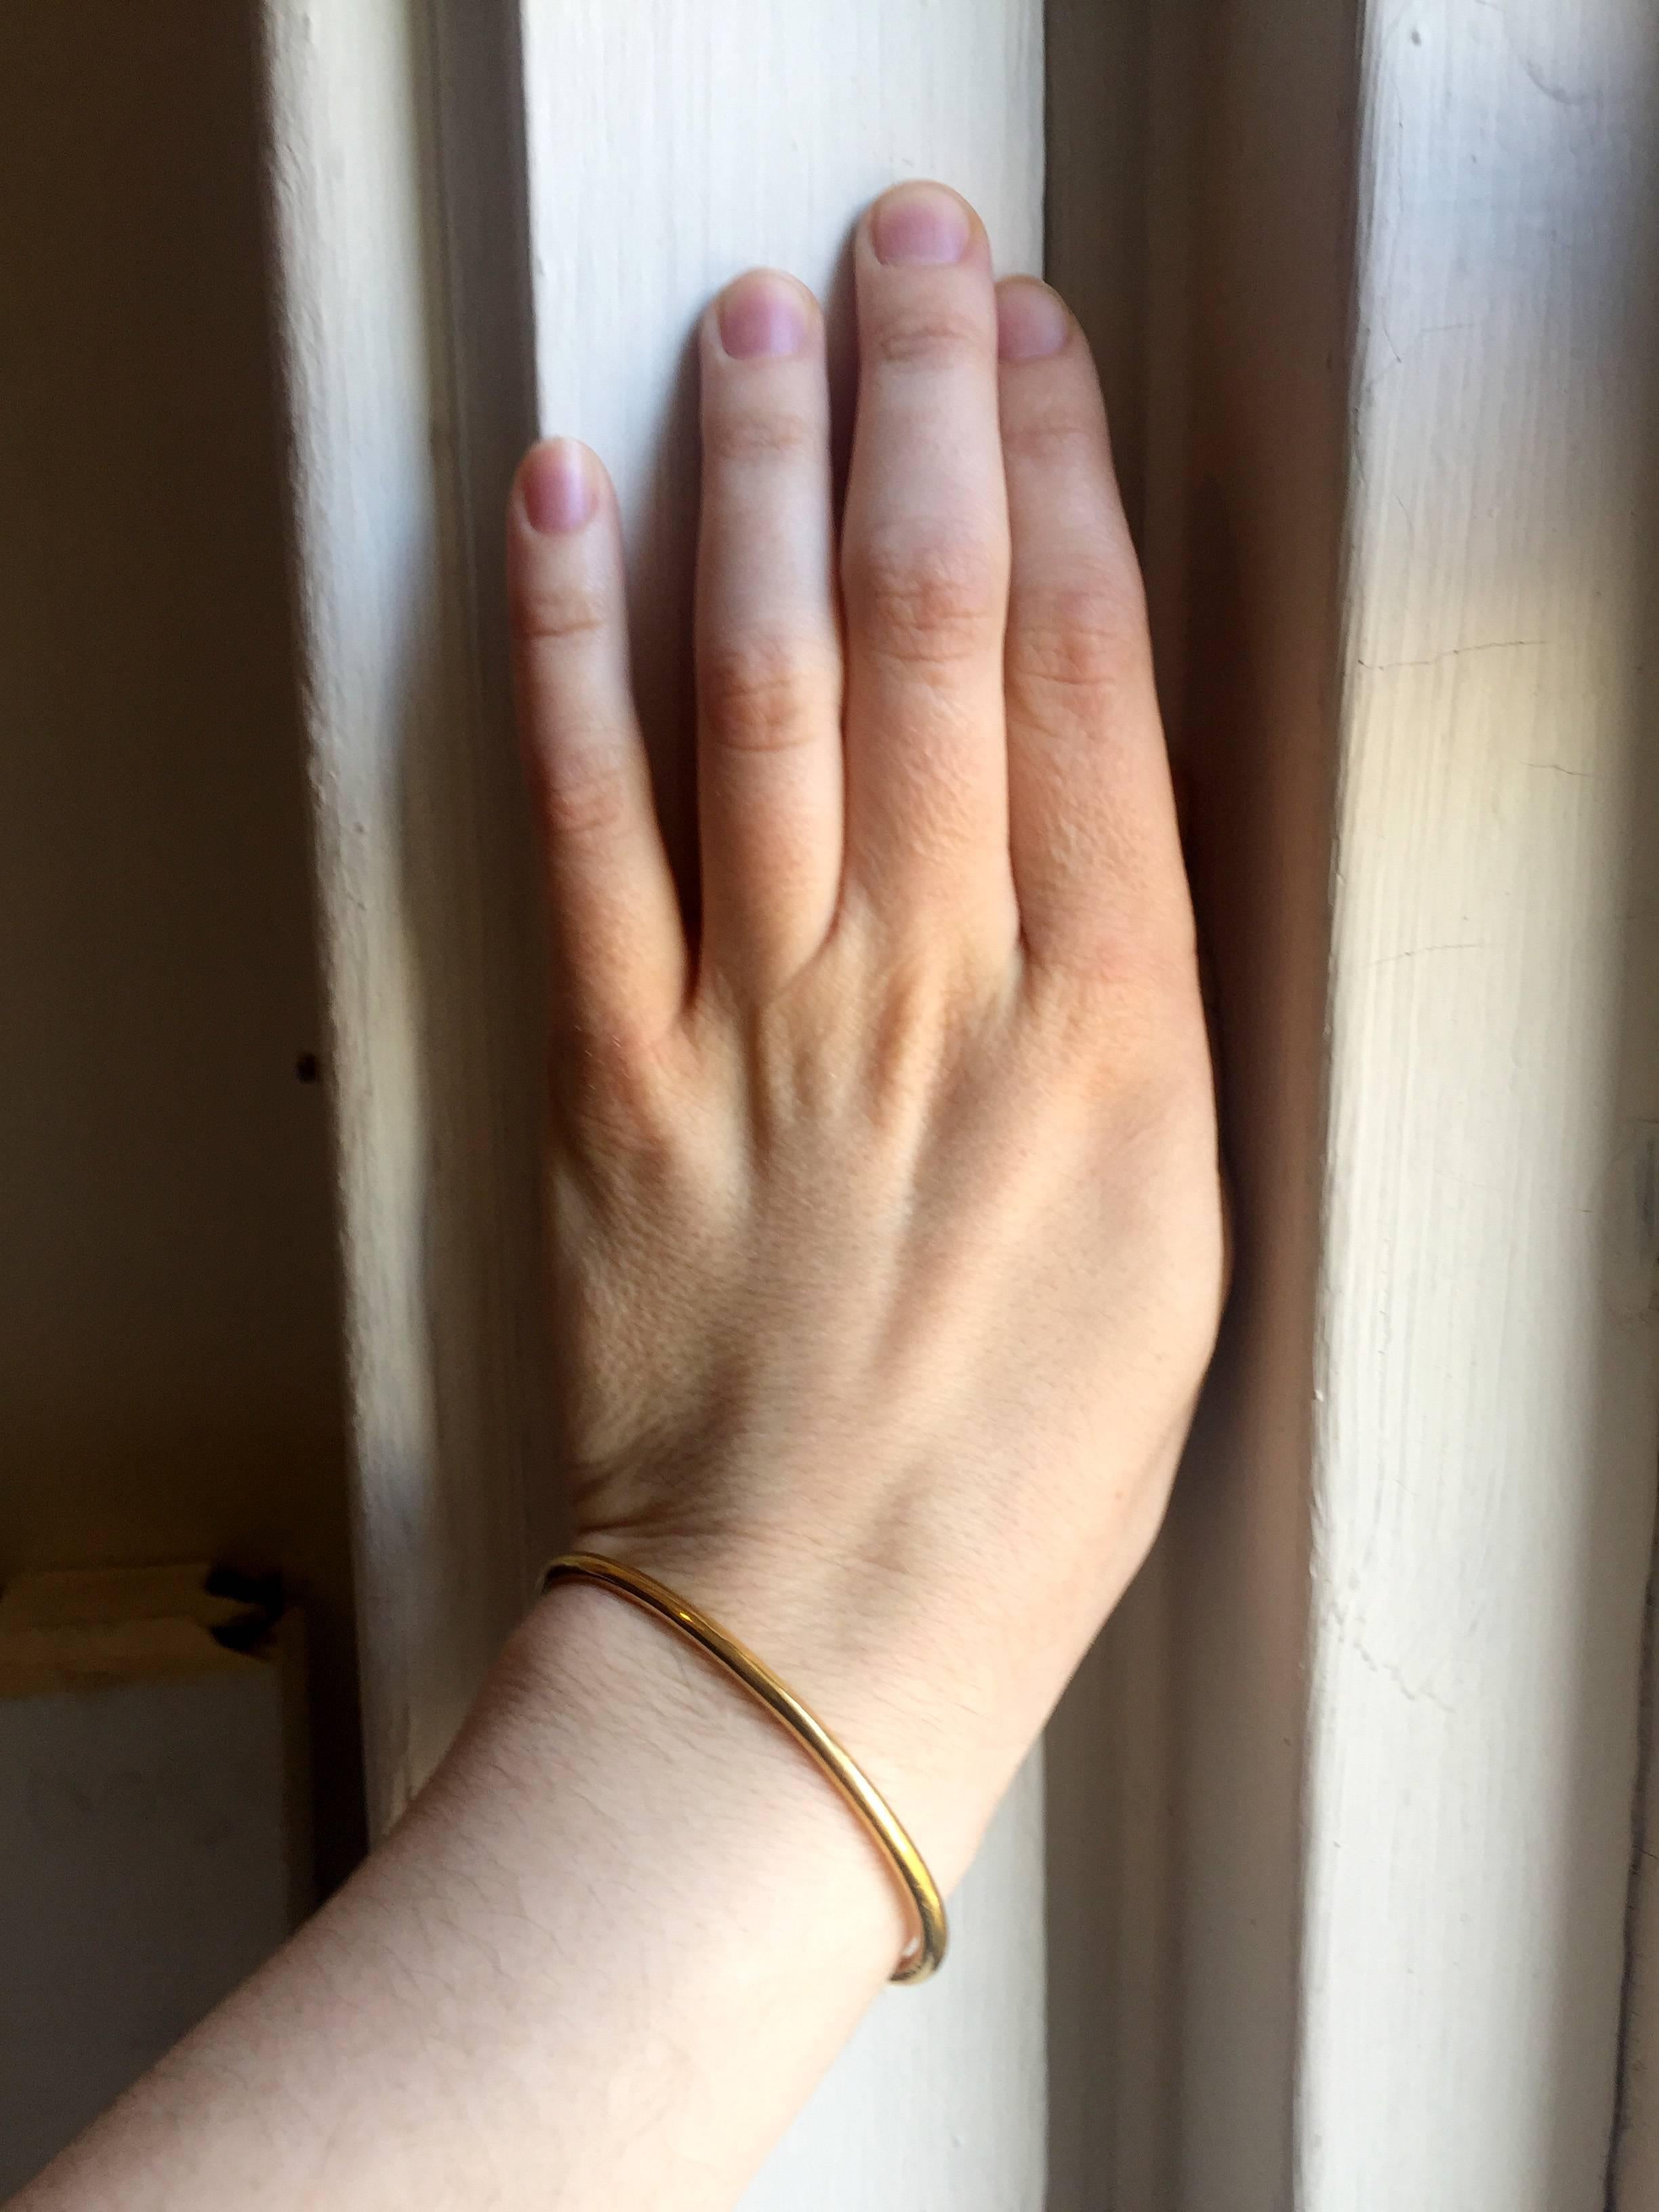 This solid 24 Kt Gold bangle is a staff favorite and a great everyday bracelet.  Lustrous and malleable yellow gold forms to the wrist and develops a warm patina with wear.  

Can also be engraved upon request.  Please allow an extra week for